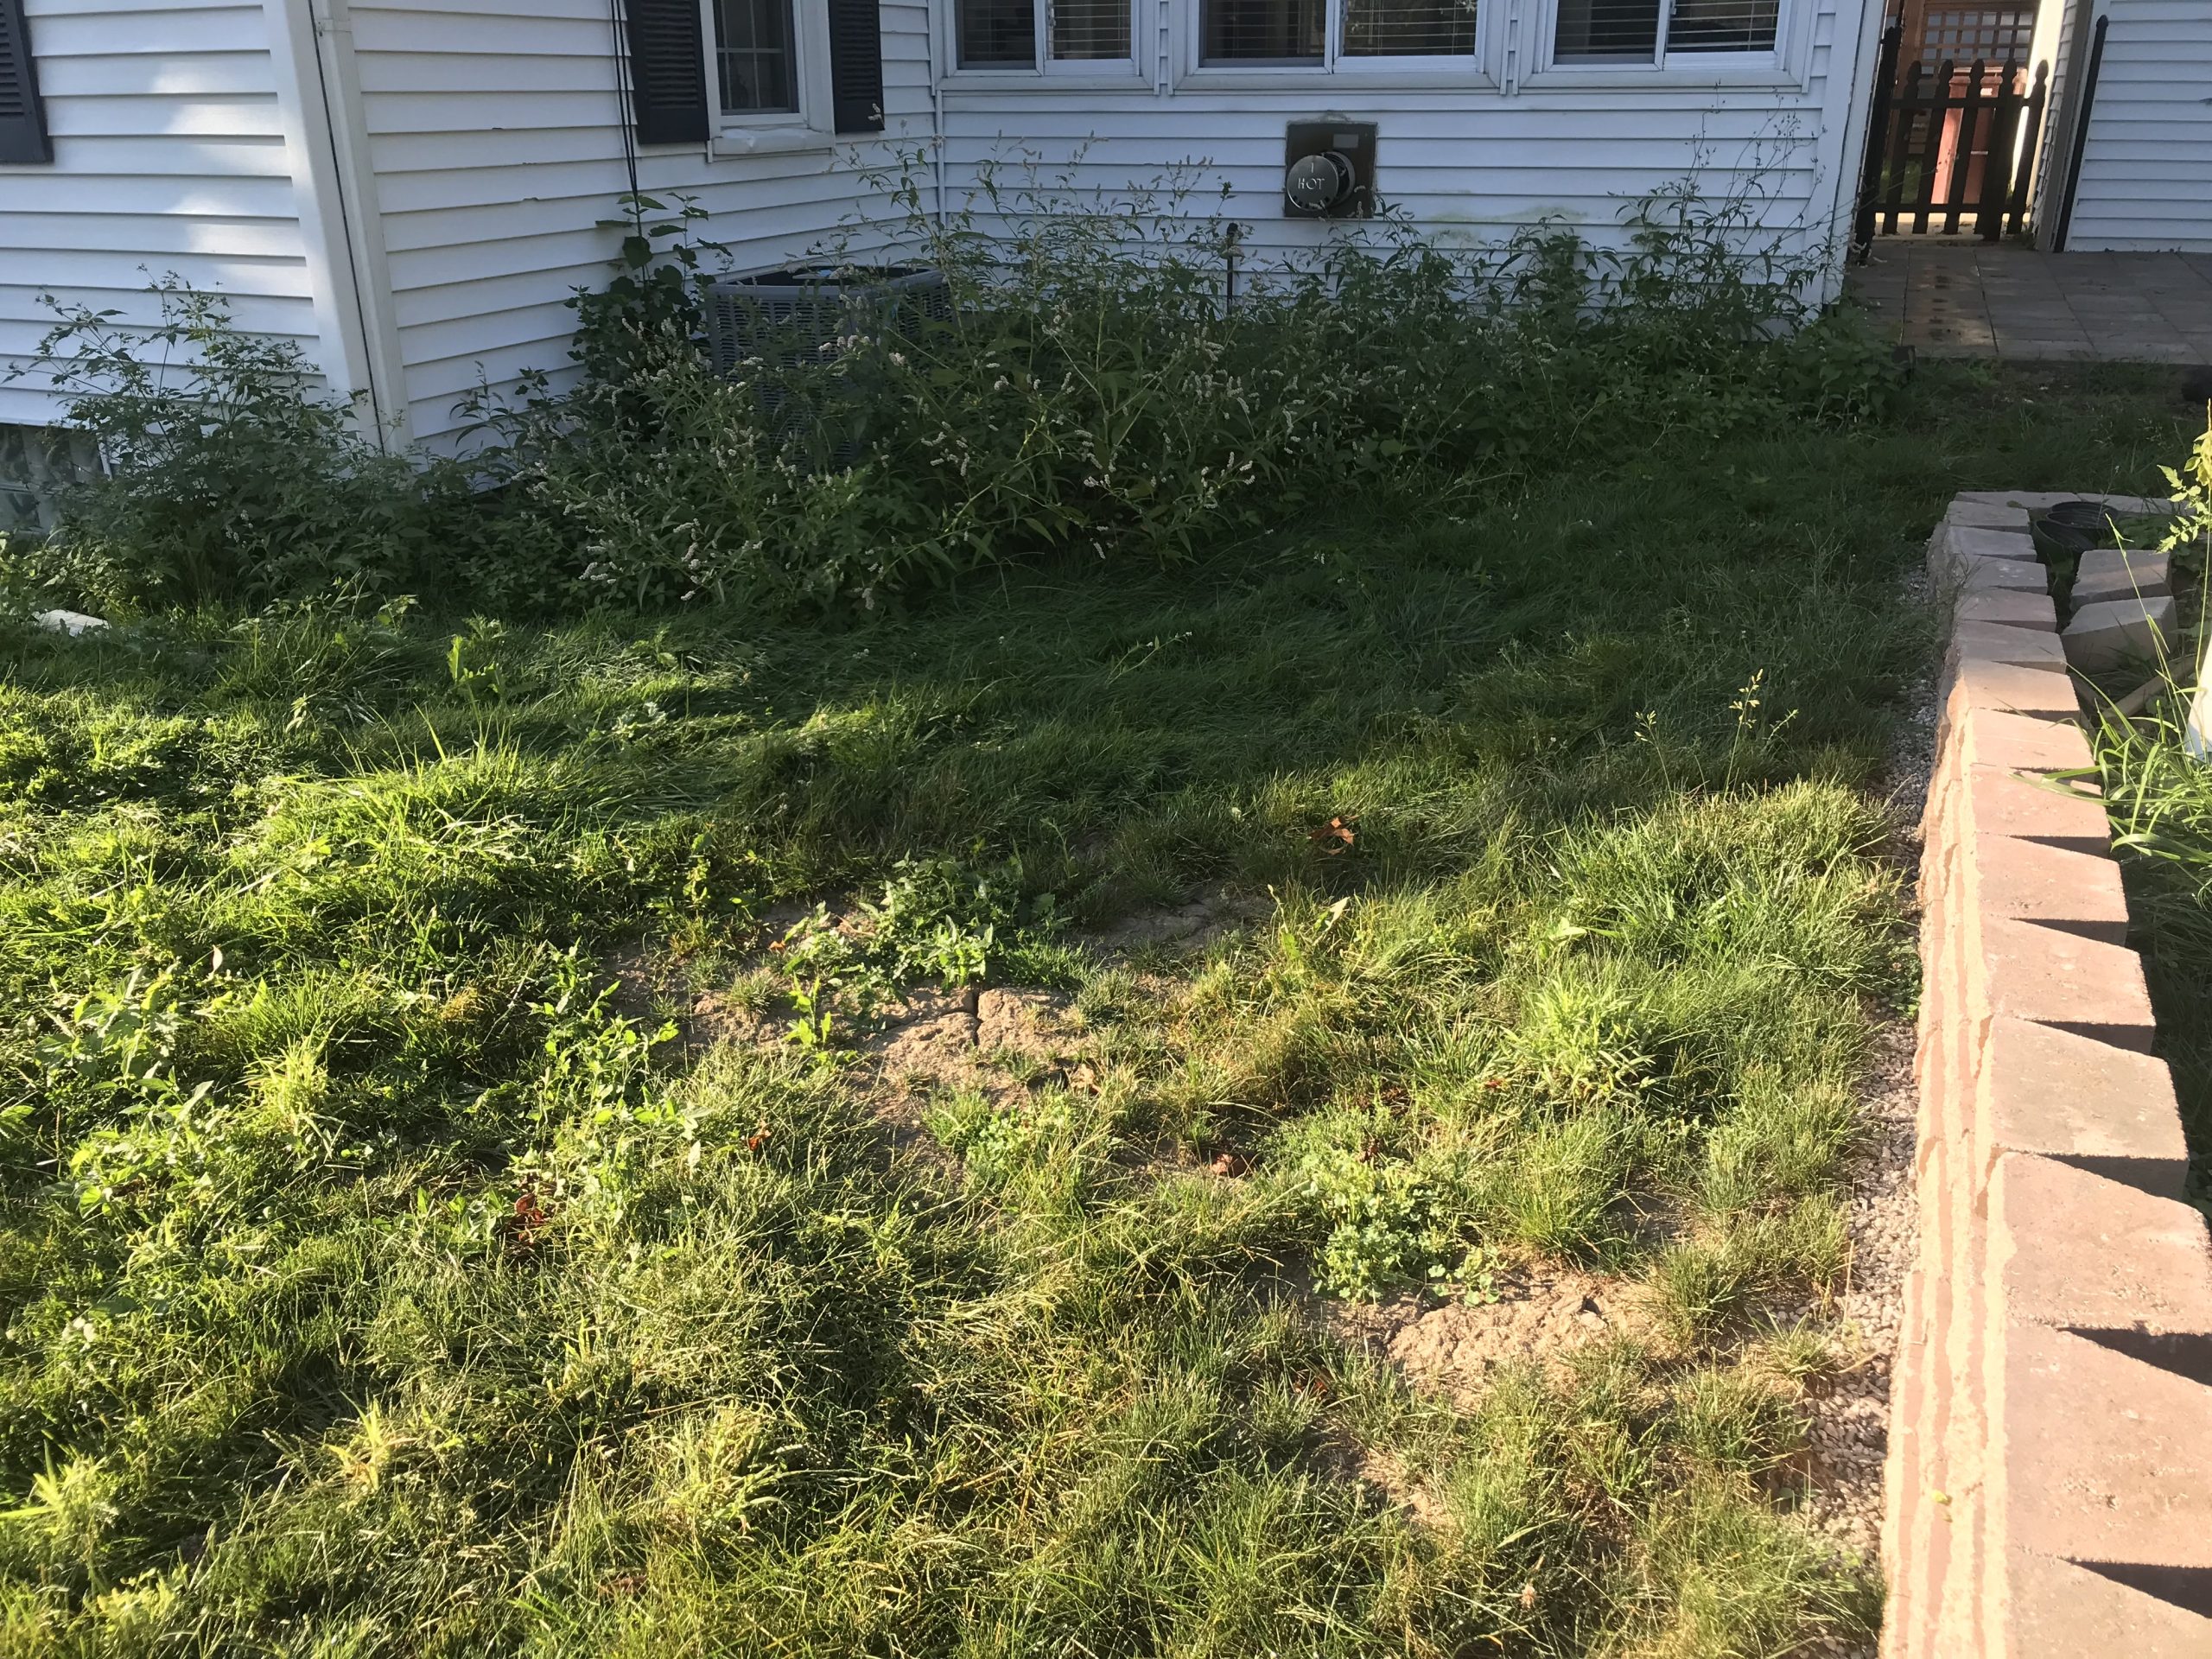 Overgrown lawn before new patio was installed